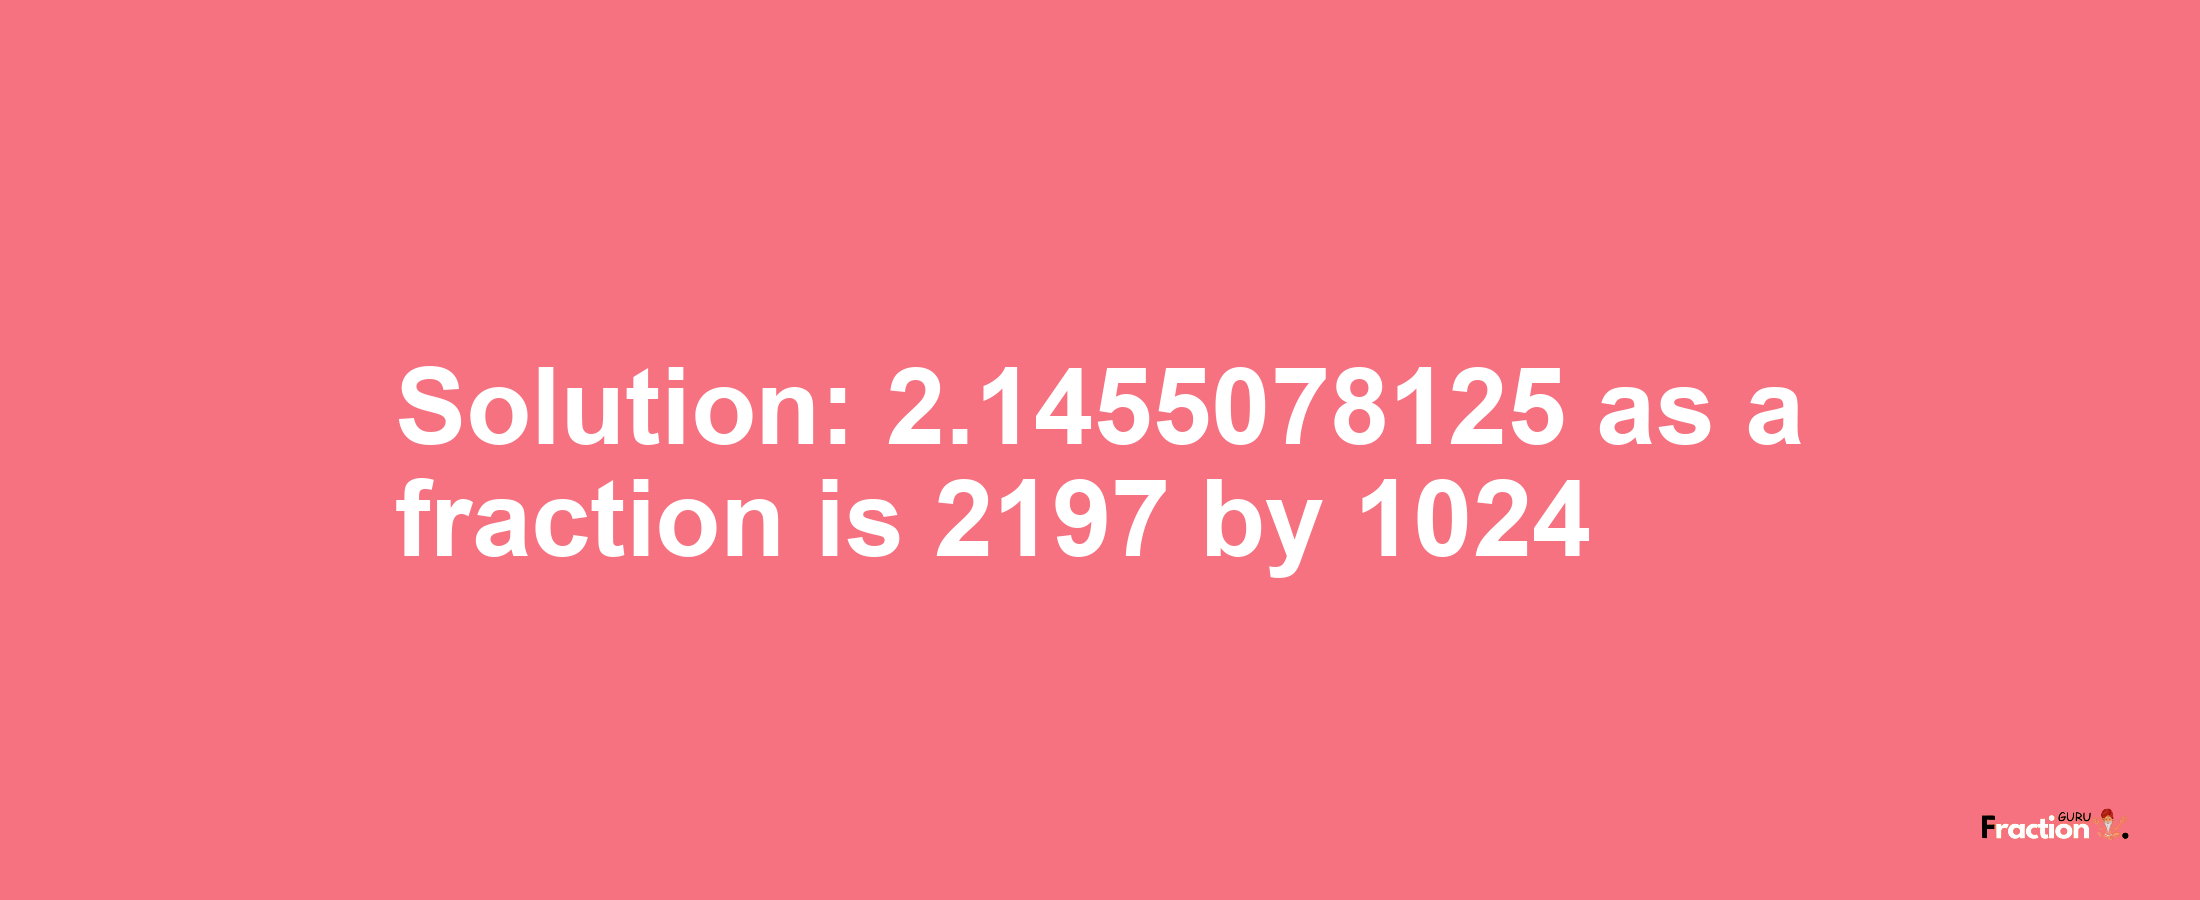 Solution:2.1455078125 as a fraction is 2197/1024